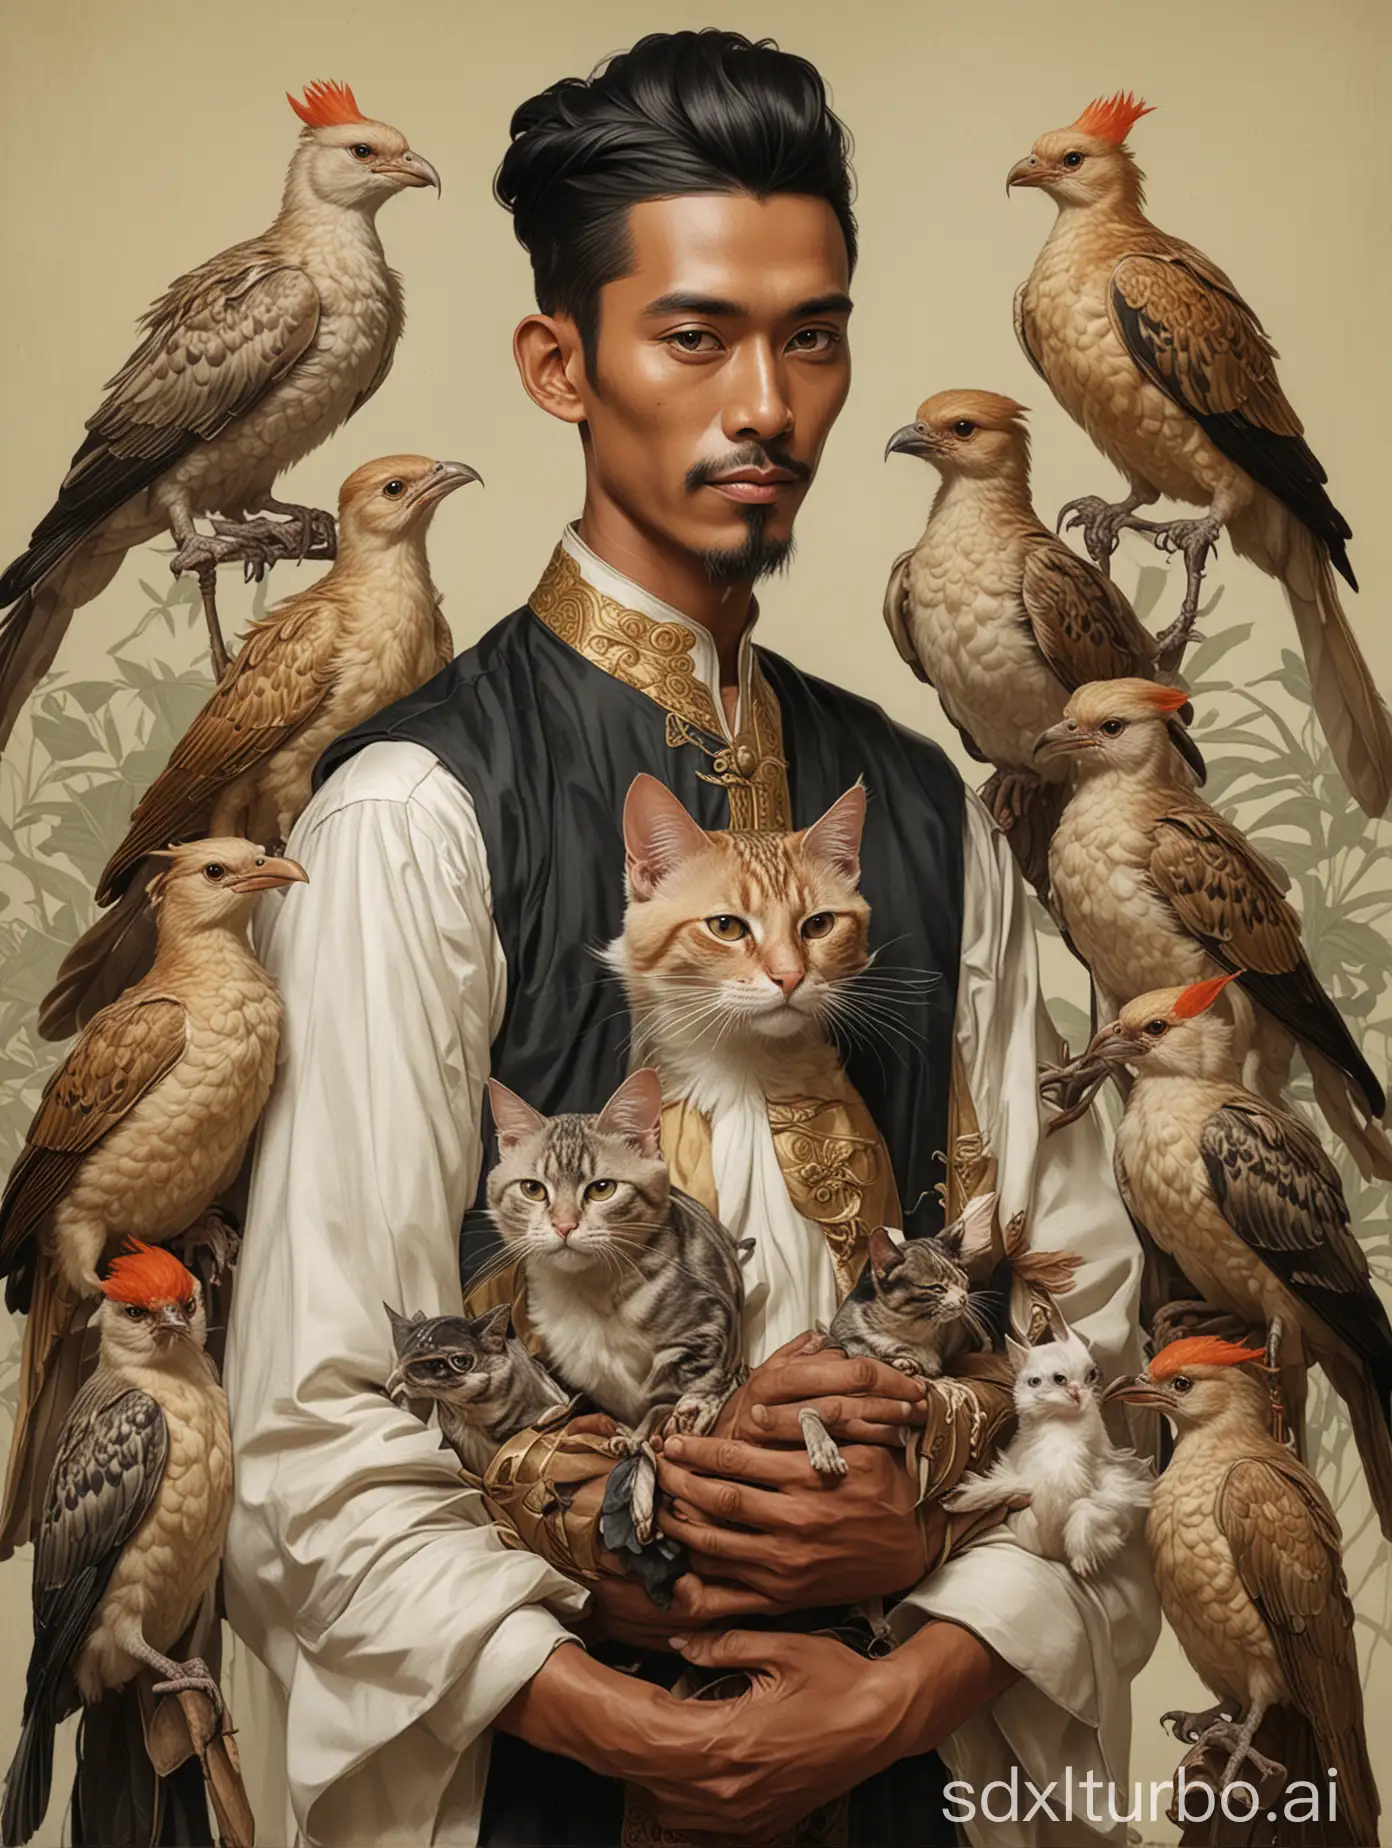 a group portrait of javanese men holding various birds-cat hybrid pet for a movie in Leyendecker illustration style